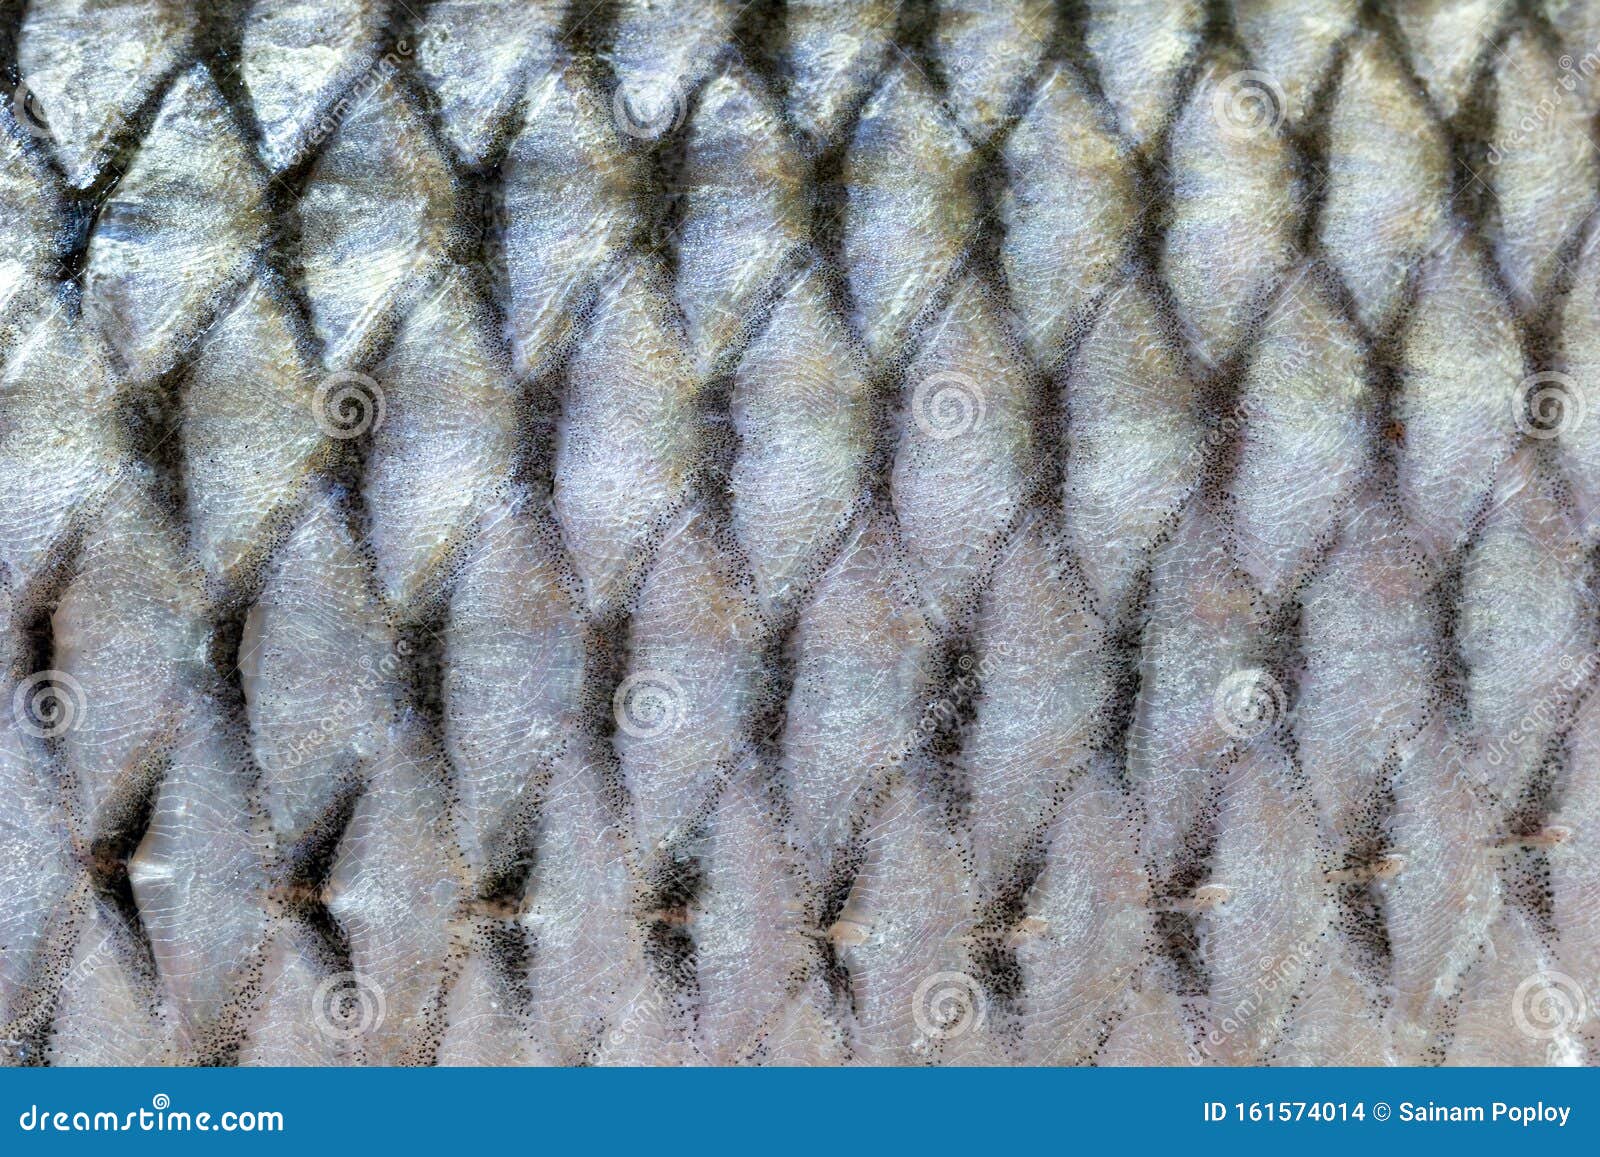 Fish scales texture. stock photo. Image of pattern, campaign